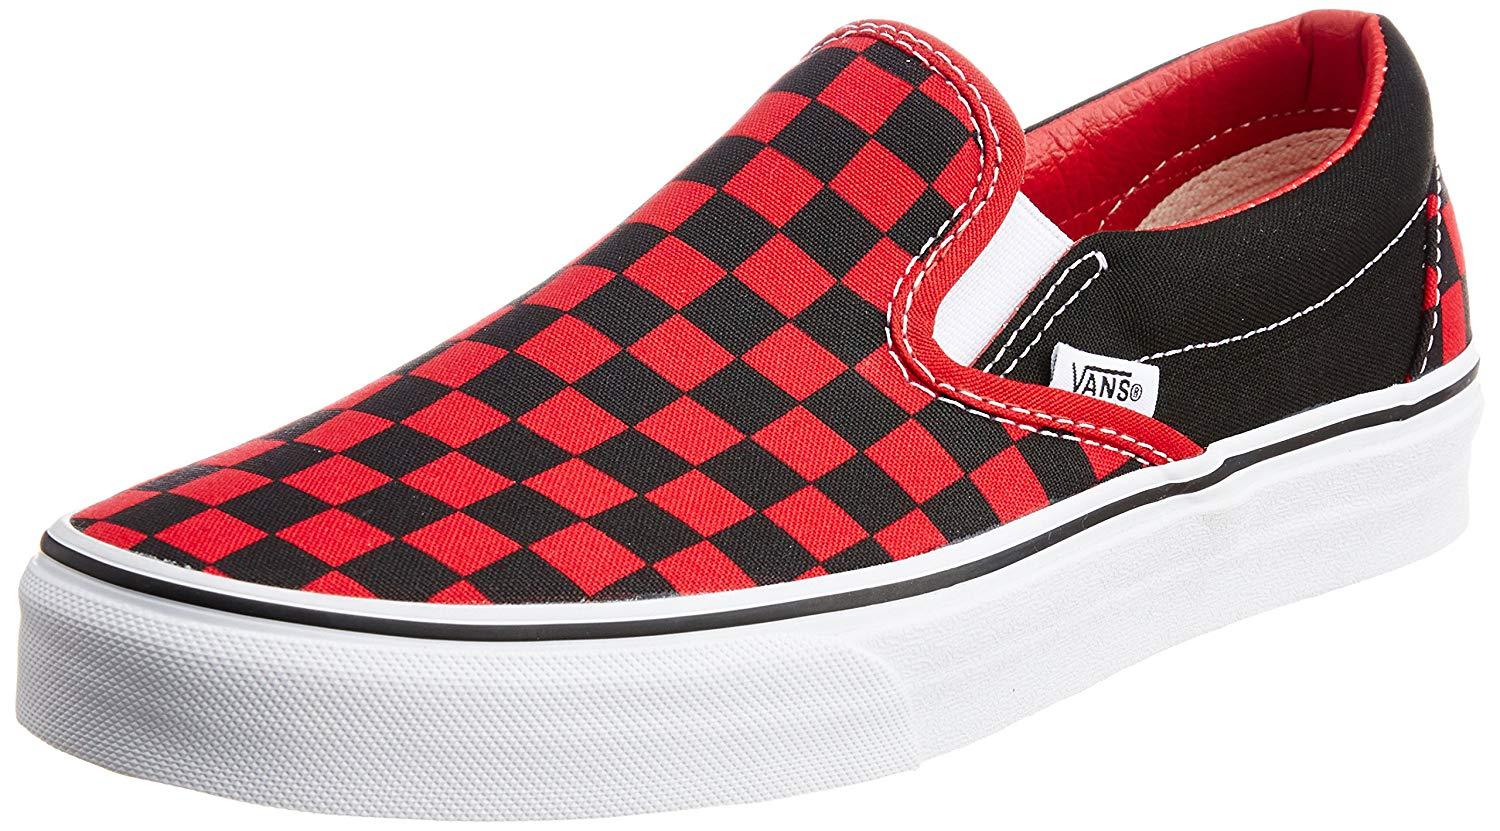 Checkerd Vans Red Logo - Vans Men's Classic Slip-on Checkerboard Red and Black Canvas Boat ...